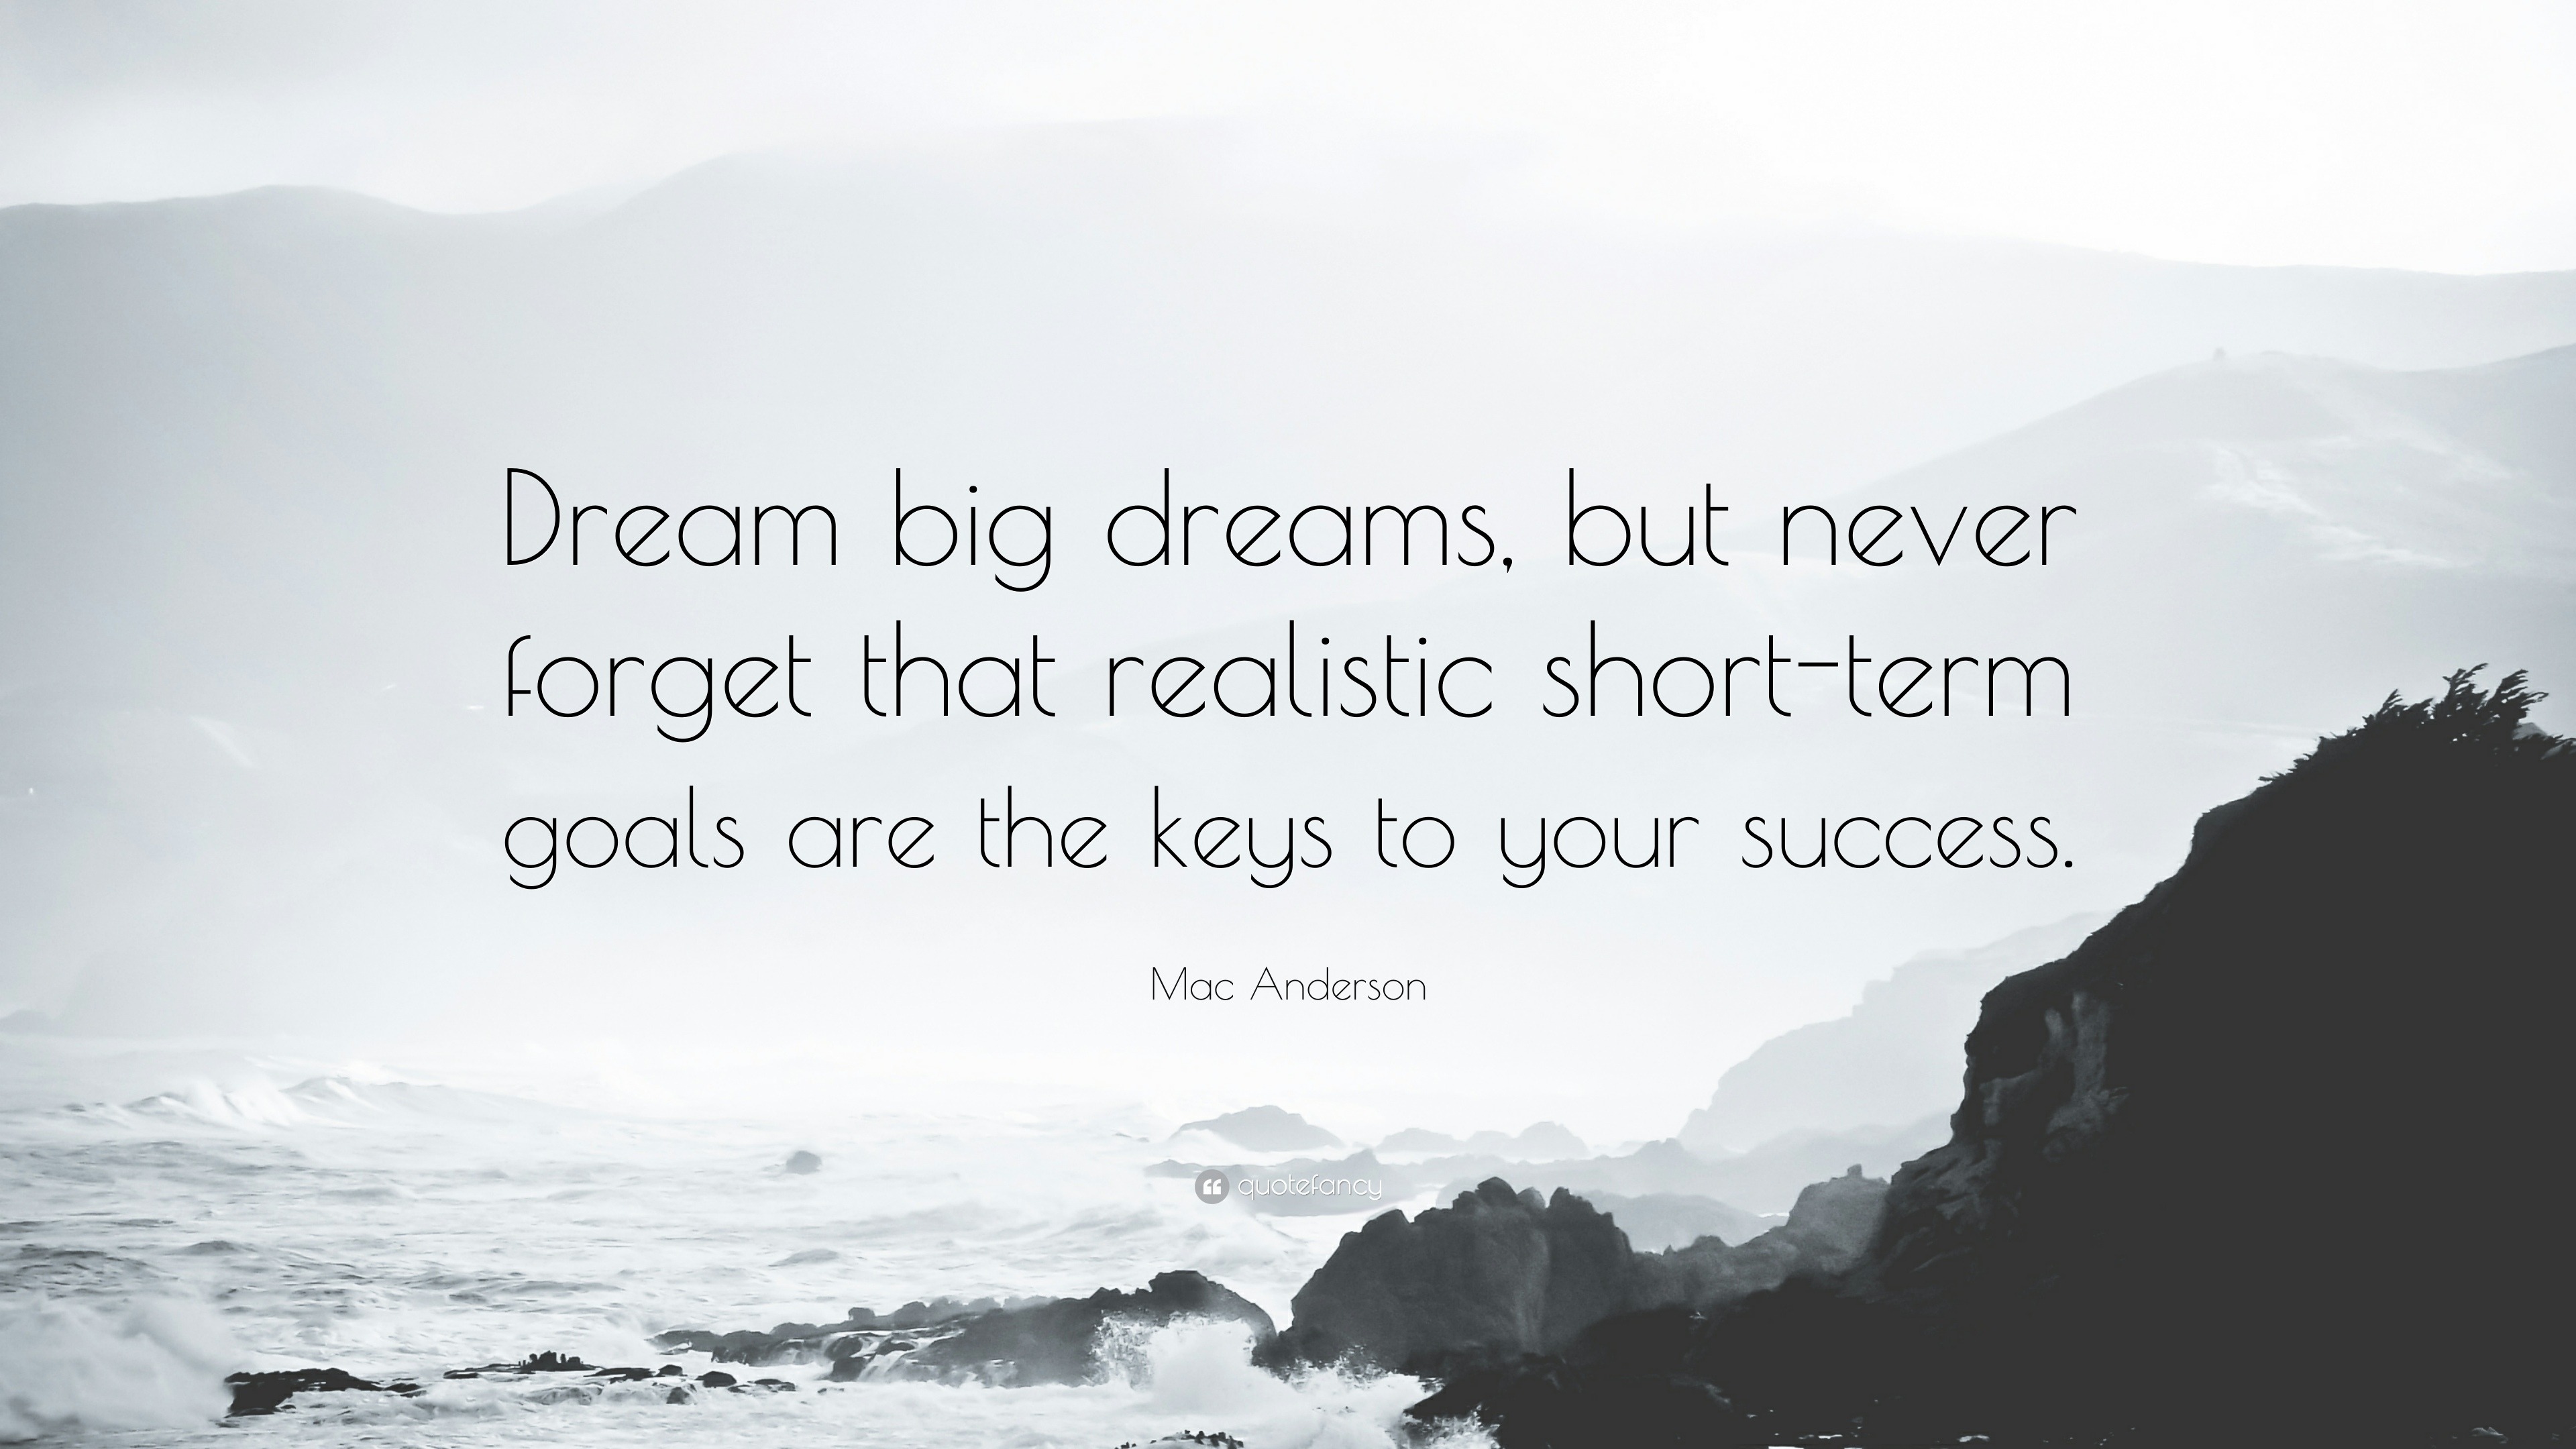 Mac Anderson Quote: “Dream big dreams, but never forget that realistic short-term  goals are the